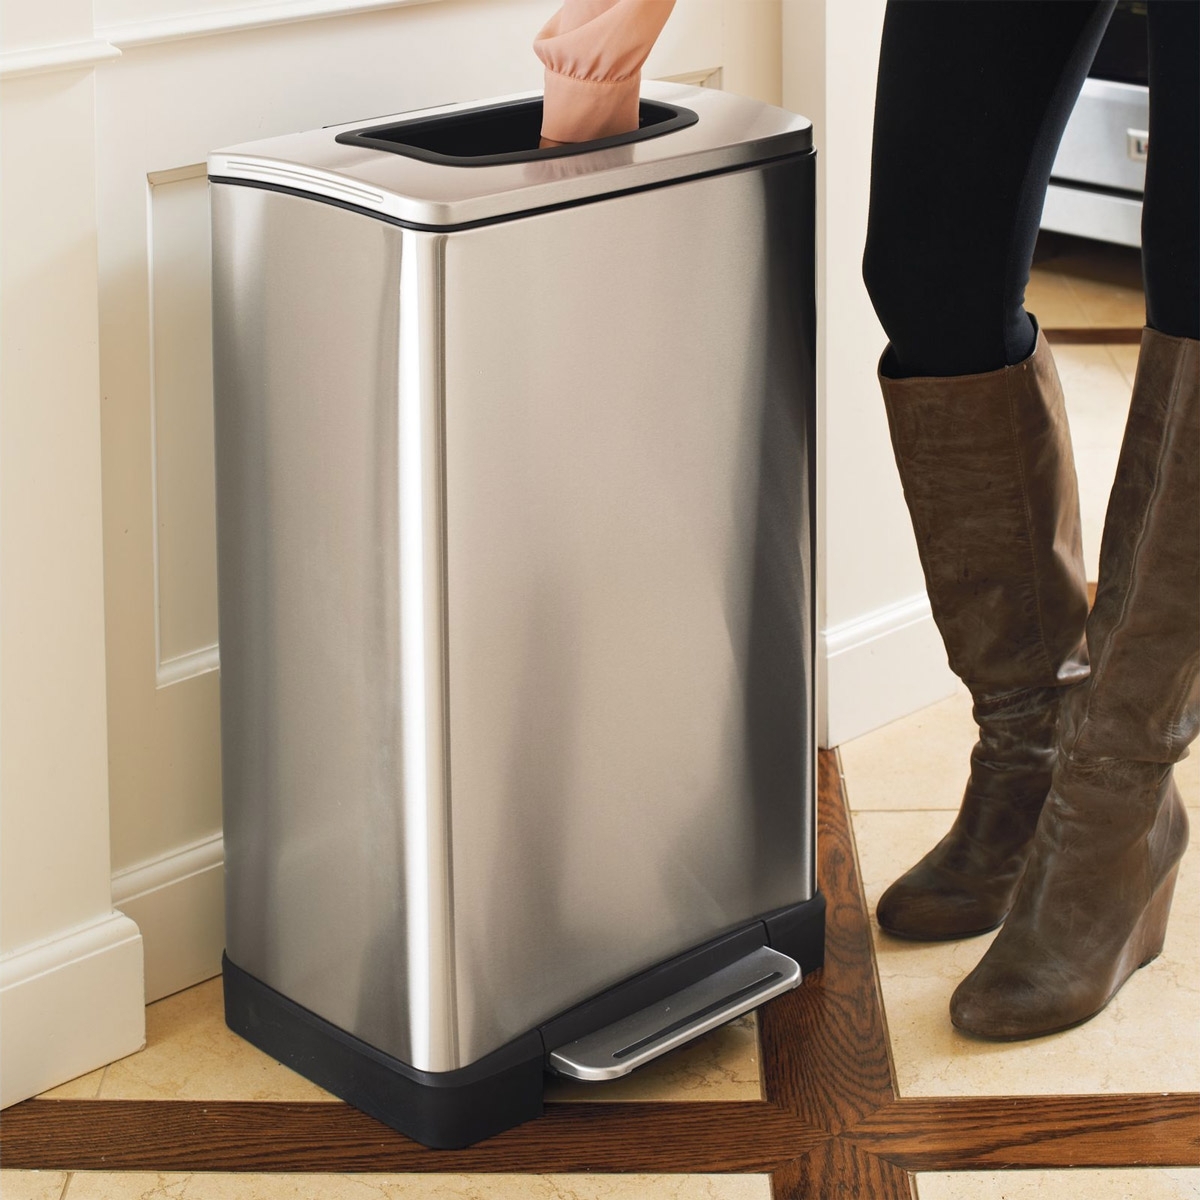 Stainless Steel Trash Can 5 Gallon